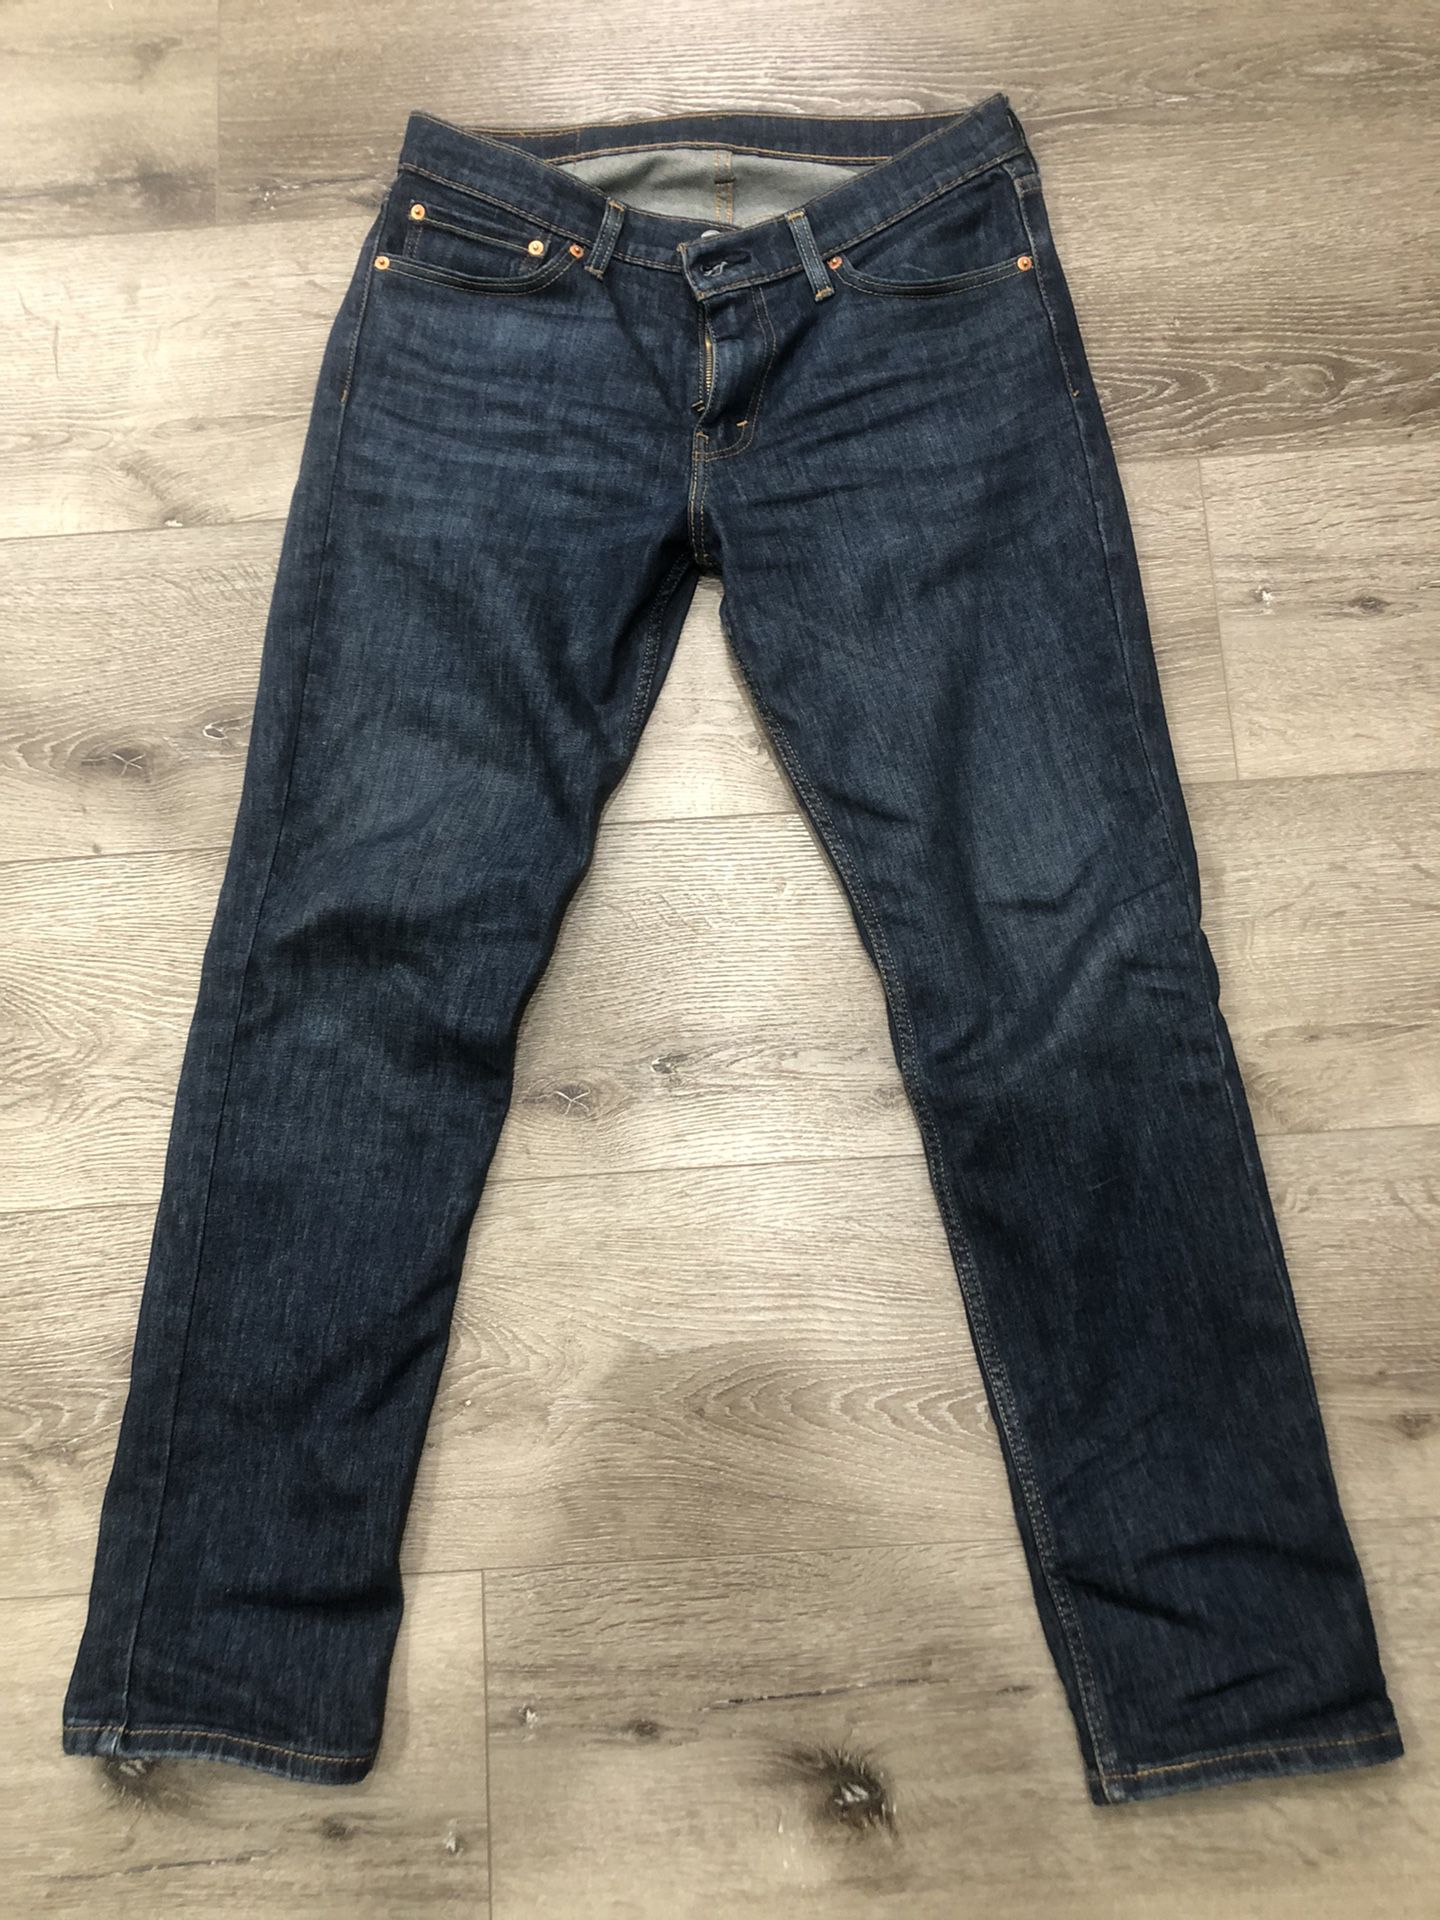 Levis 511 33x32 Slim Fit Jeans for Sale in San Diego, CA - OfferUp